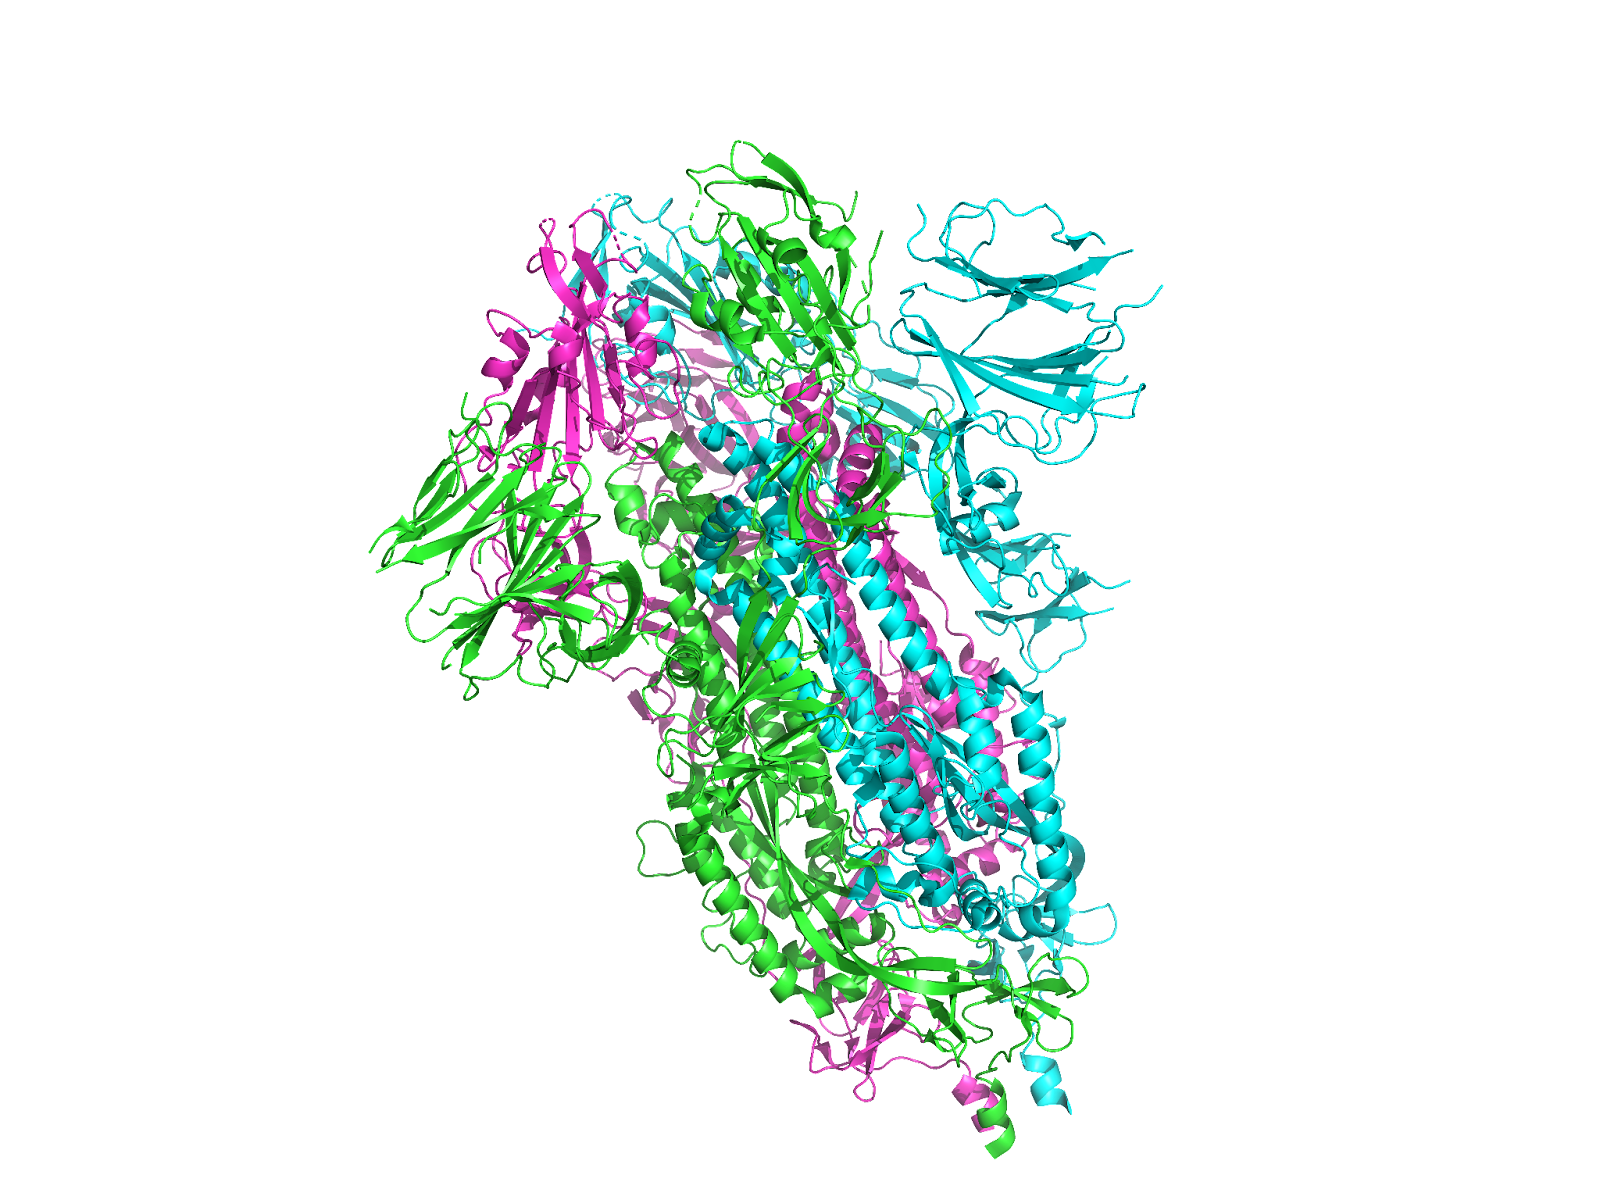 An image of a protein structure prediction